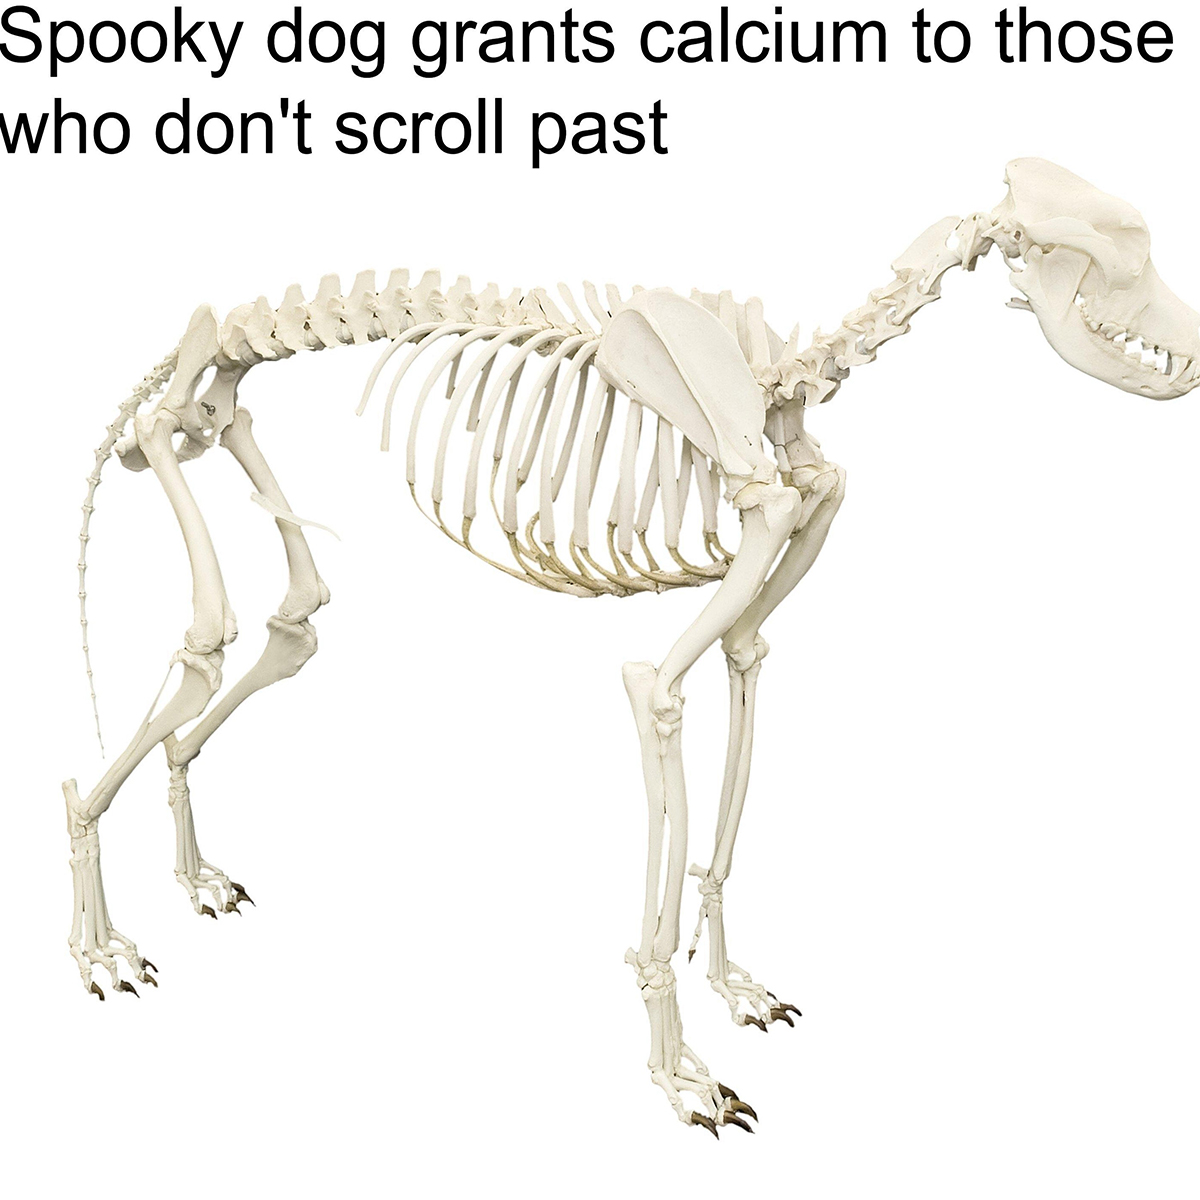 dank memes - dog skeleton meme - Spooky dog grants calcium to those who don't scroll past